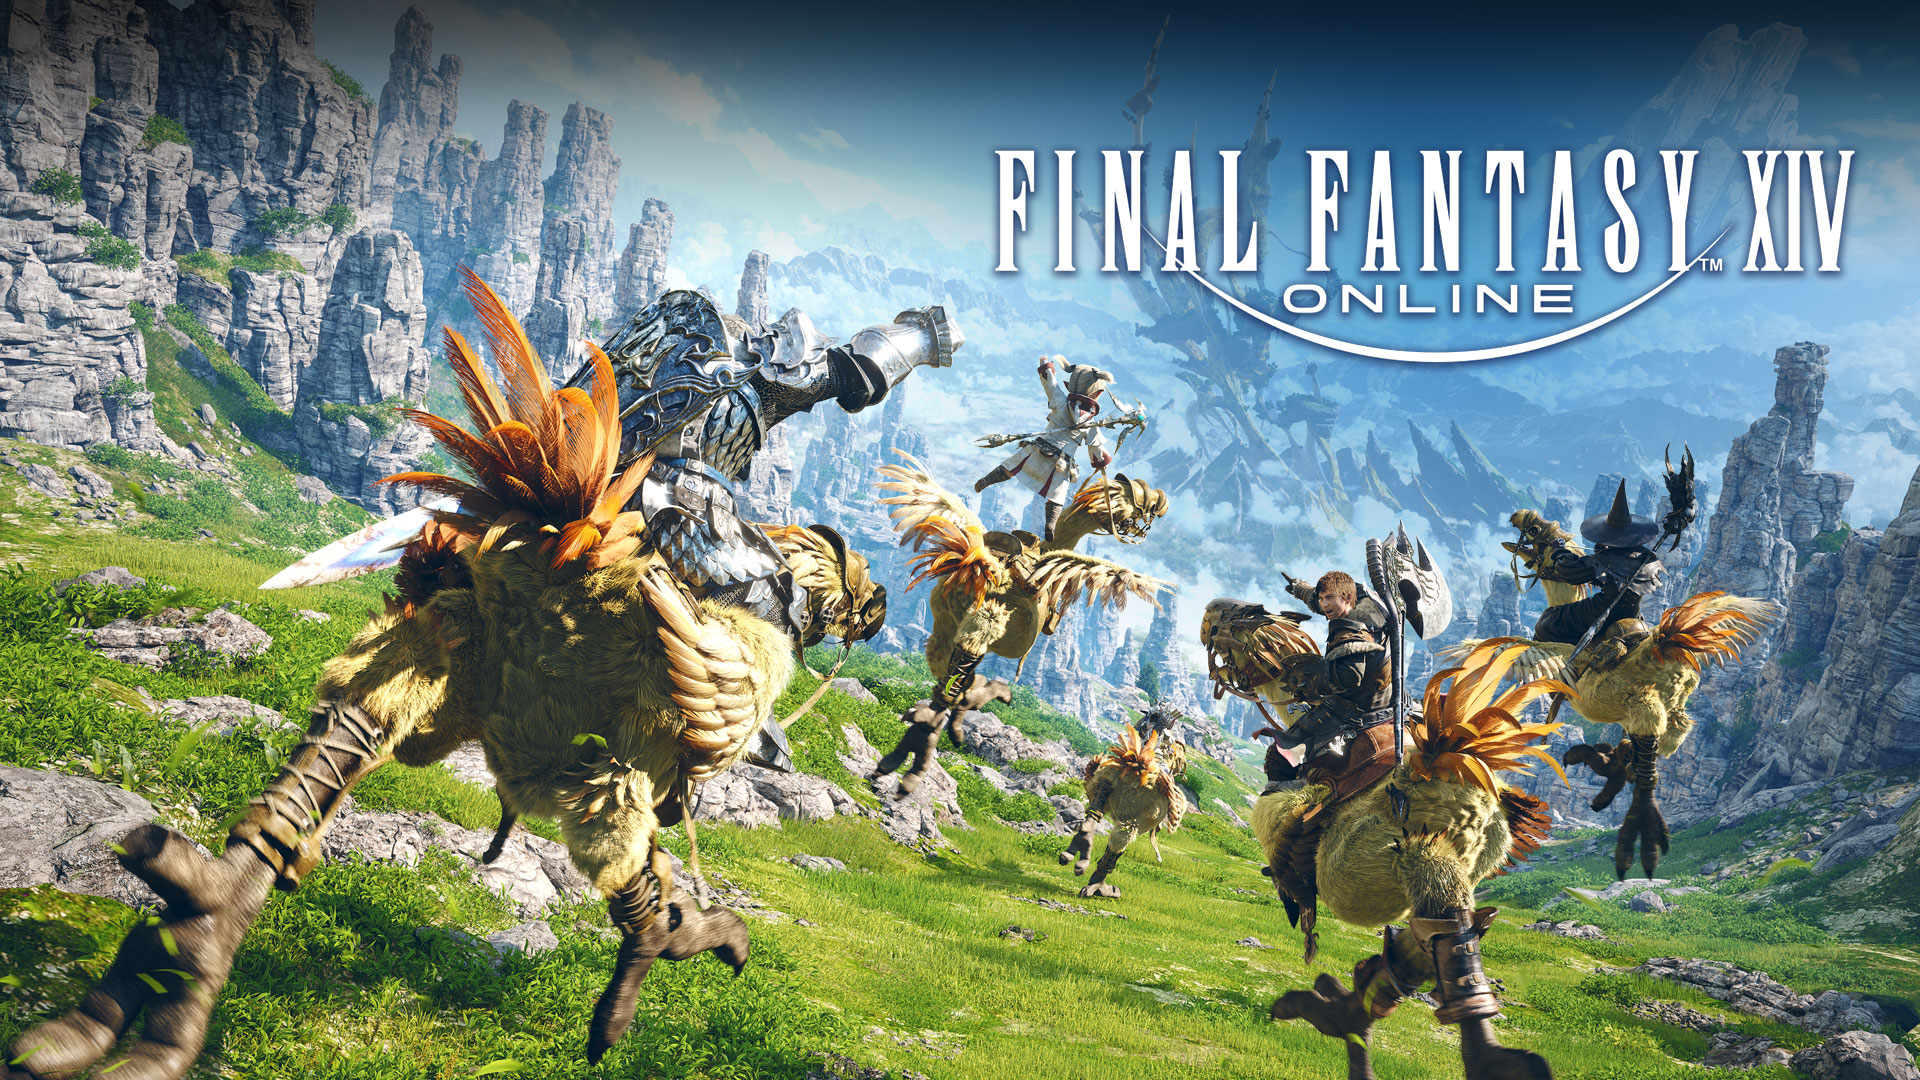 Final Fantasy XIV Online Logo, five characters ride on Chocobos through a grassy valley. 